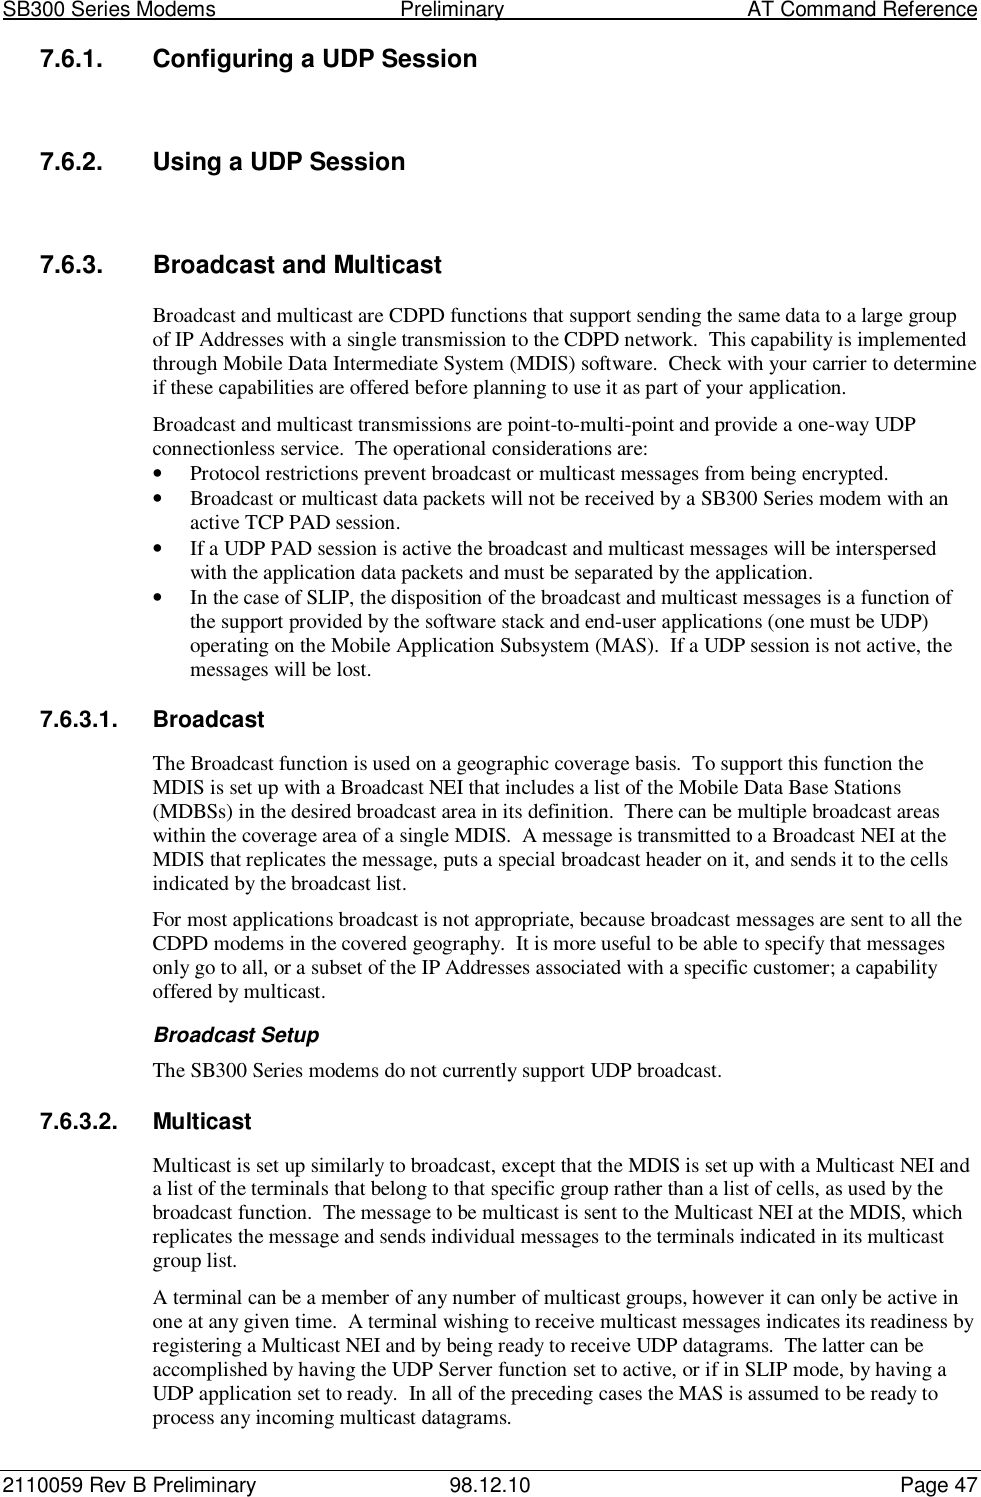 SB300 Series Modems                                  Preliminary                                         AT Command Reference2110059 Rev B Preliminary 98.12.10 Page 477.6.1.  Configuring a UDP Session7.6.2.  Using a UDP Session7.6.3.  Broadcast and MulticastBroadcast and multicast are CDPD functions that support sending the same data to a large groupof IP Addresses with a single transmission to the CDPD network.  This capability is implementedthrough Mobile Data Intermediate System (MDIS) software.  Check with your carrier to determineif these capabilities are offered before planning to use it as part of your application.Broadcast and multicast transmissions are point-to-multi-point and provide a one-way UDPconnectionless service.  The operational considerations are:• Protocol restrictions prevent broadcast or multicast messages from being encrypted.• Broadcast or multicast data packets will not be received by a SB300 Series modem with anactive TCP PAD session.• If a UDP PAD session is active the broadcast and multicast messages will be interspersedwith the application data packets and must be separated by the application.• In the case of SLIP, the disposition of the broadcast and multicast messages is a function ofthe support provided by the software stack and end-user applications (one must be UDP)operating on the Mobile Application Subsystem (MAS).  If a UDP session is not active, themessages will be lost.7.6.3.1. BroadcastThe Broadcast function is used on a geographic coverage basis.  To support this function theMDIS is set up with a Broadcast NEI that includes a list of the Mobile Data Base Stations(MDBSs) in the desired broadcast area in its definition.  There can be multiple broadcast areaswithin the coverage area of a single MDIS.  A message is transmitted to a Broadcast NEI at theMDIS that replicates the message, puts a special broadcast header on it, and sends it to the cellsindicated by the broadcast list.For most applications broadcast is not appropriate, because broadcast messages are sent to all theCDPD modems in the covered geography.  It is more useful to be able to specify that messagesonly go to all, or a subset of the IP Addresses associated with a specific customer; a capabilityoffered by multicast.Broadcast SetupThe SB300 Series modems do not currently support UDP broadcast.7.6.3.2. MulticastMulticast is set up similarly to broadcast, except that the MDIS is set up with a Multicast NEI anda list of the terminals that belong to that specific group rather than a list of cells, as used by thebroadcast function.  The message to be multicast is sent to the Multicast NEI at the MDIS, whichreplicates the message and sends individual messages to the terminals indicated in its multicastgroup list.A terminal can be a member of any number of multicast groups, however it can only be active inone at any given time.  A terminal wishing to receive multicast messages indicates its readiness byregistering a Multicast NEI and by being ready to receive UDP datagrams.  The latter can beaccomplished by having the UDP Server function set to active, or if in SLIP mode, by having aUDP application set to ready.  In all of the preceding cases the MAS is assumed to be ready toprocess any incoming multicast datagrams.